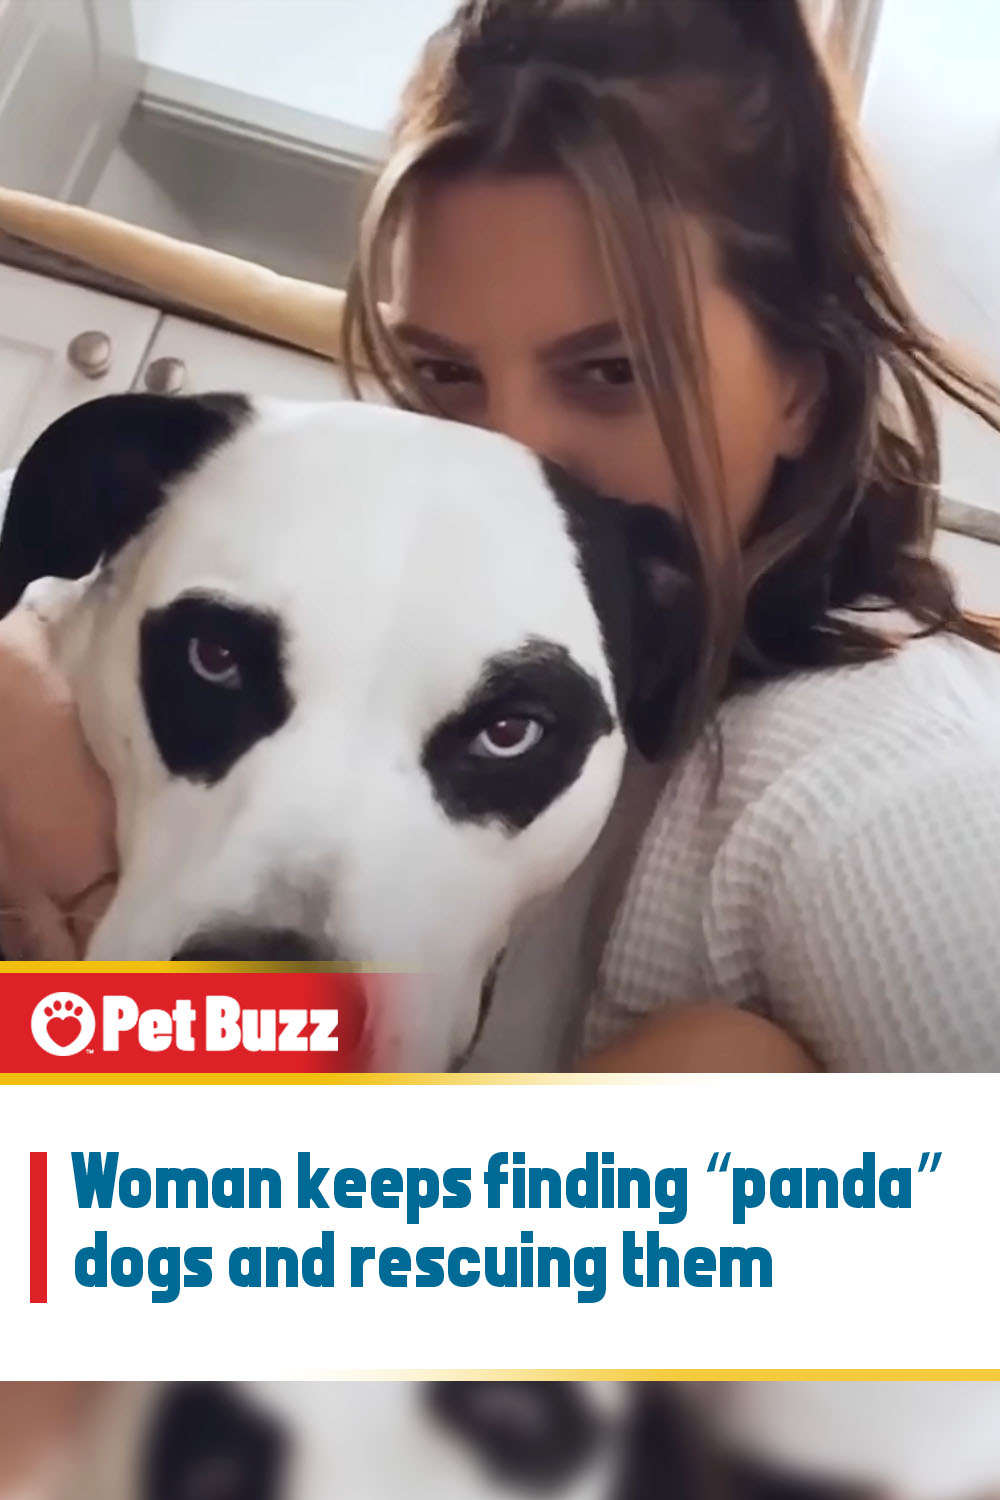 Woman keeps finding “panda” dogs and rescuing them